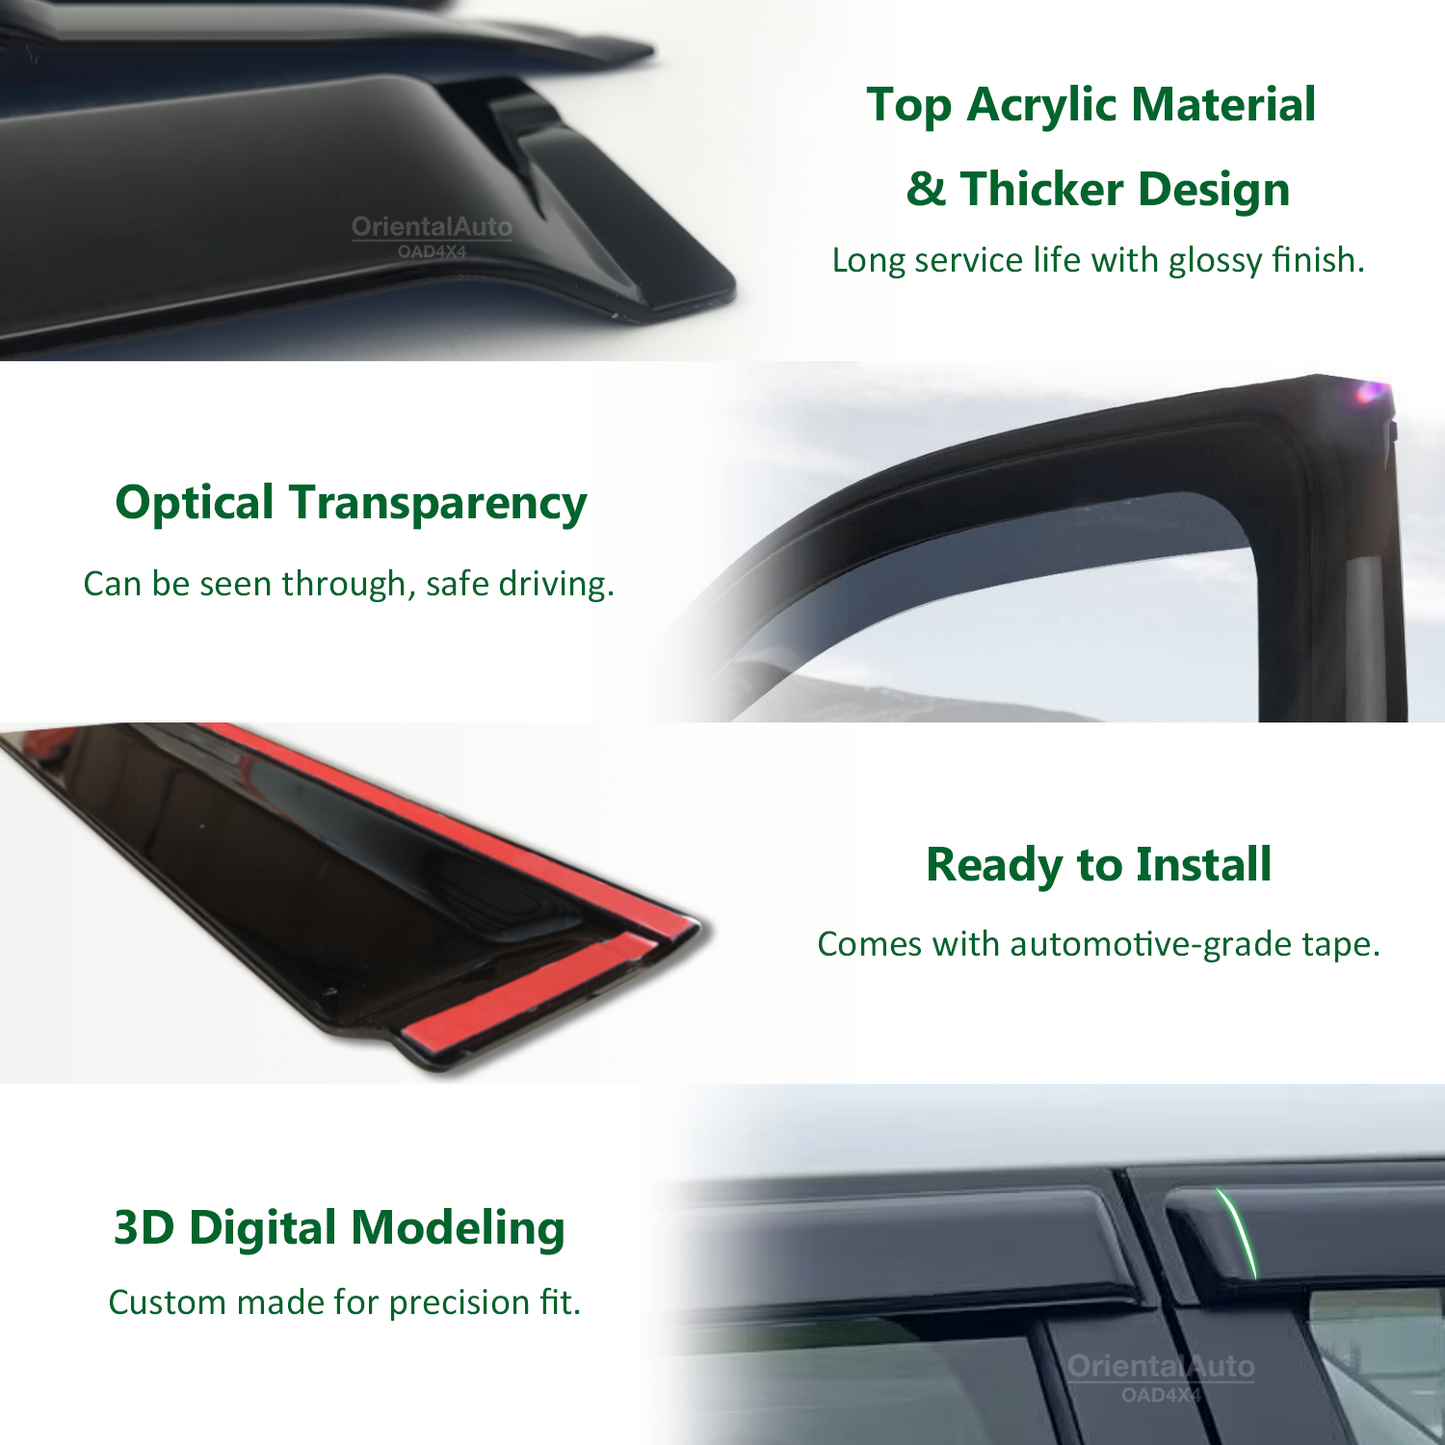 Injection Modeling Bonnet Protector & Injection Weathershield Weather Shields Window Visor for ISUZU DMAX D-MAX Dual Cab 2012-2016 Hood Protector Bonnet Guard